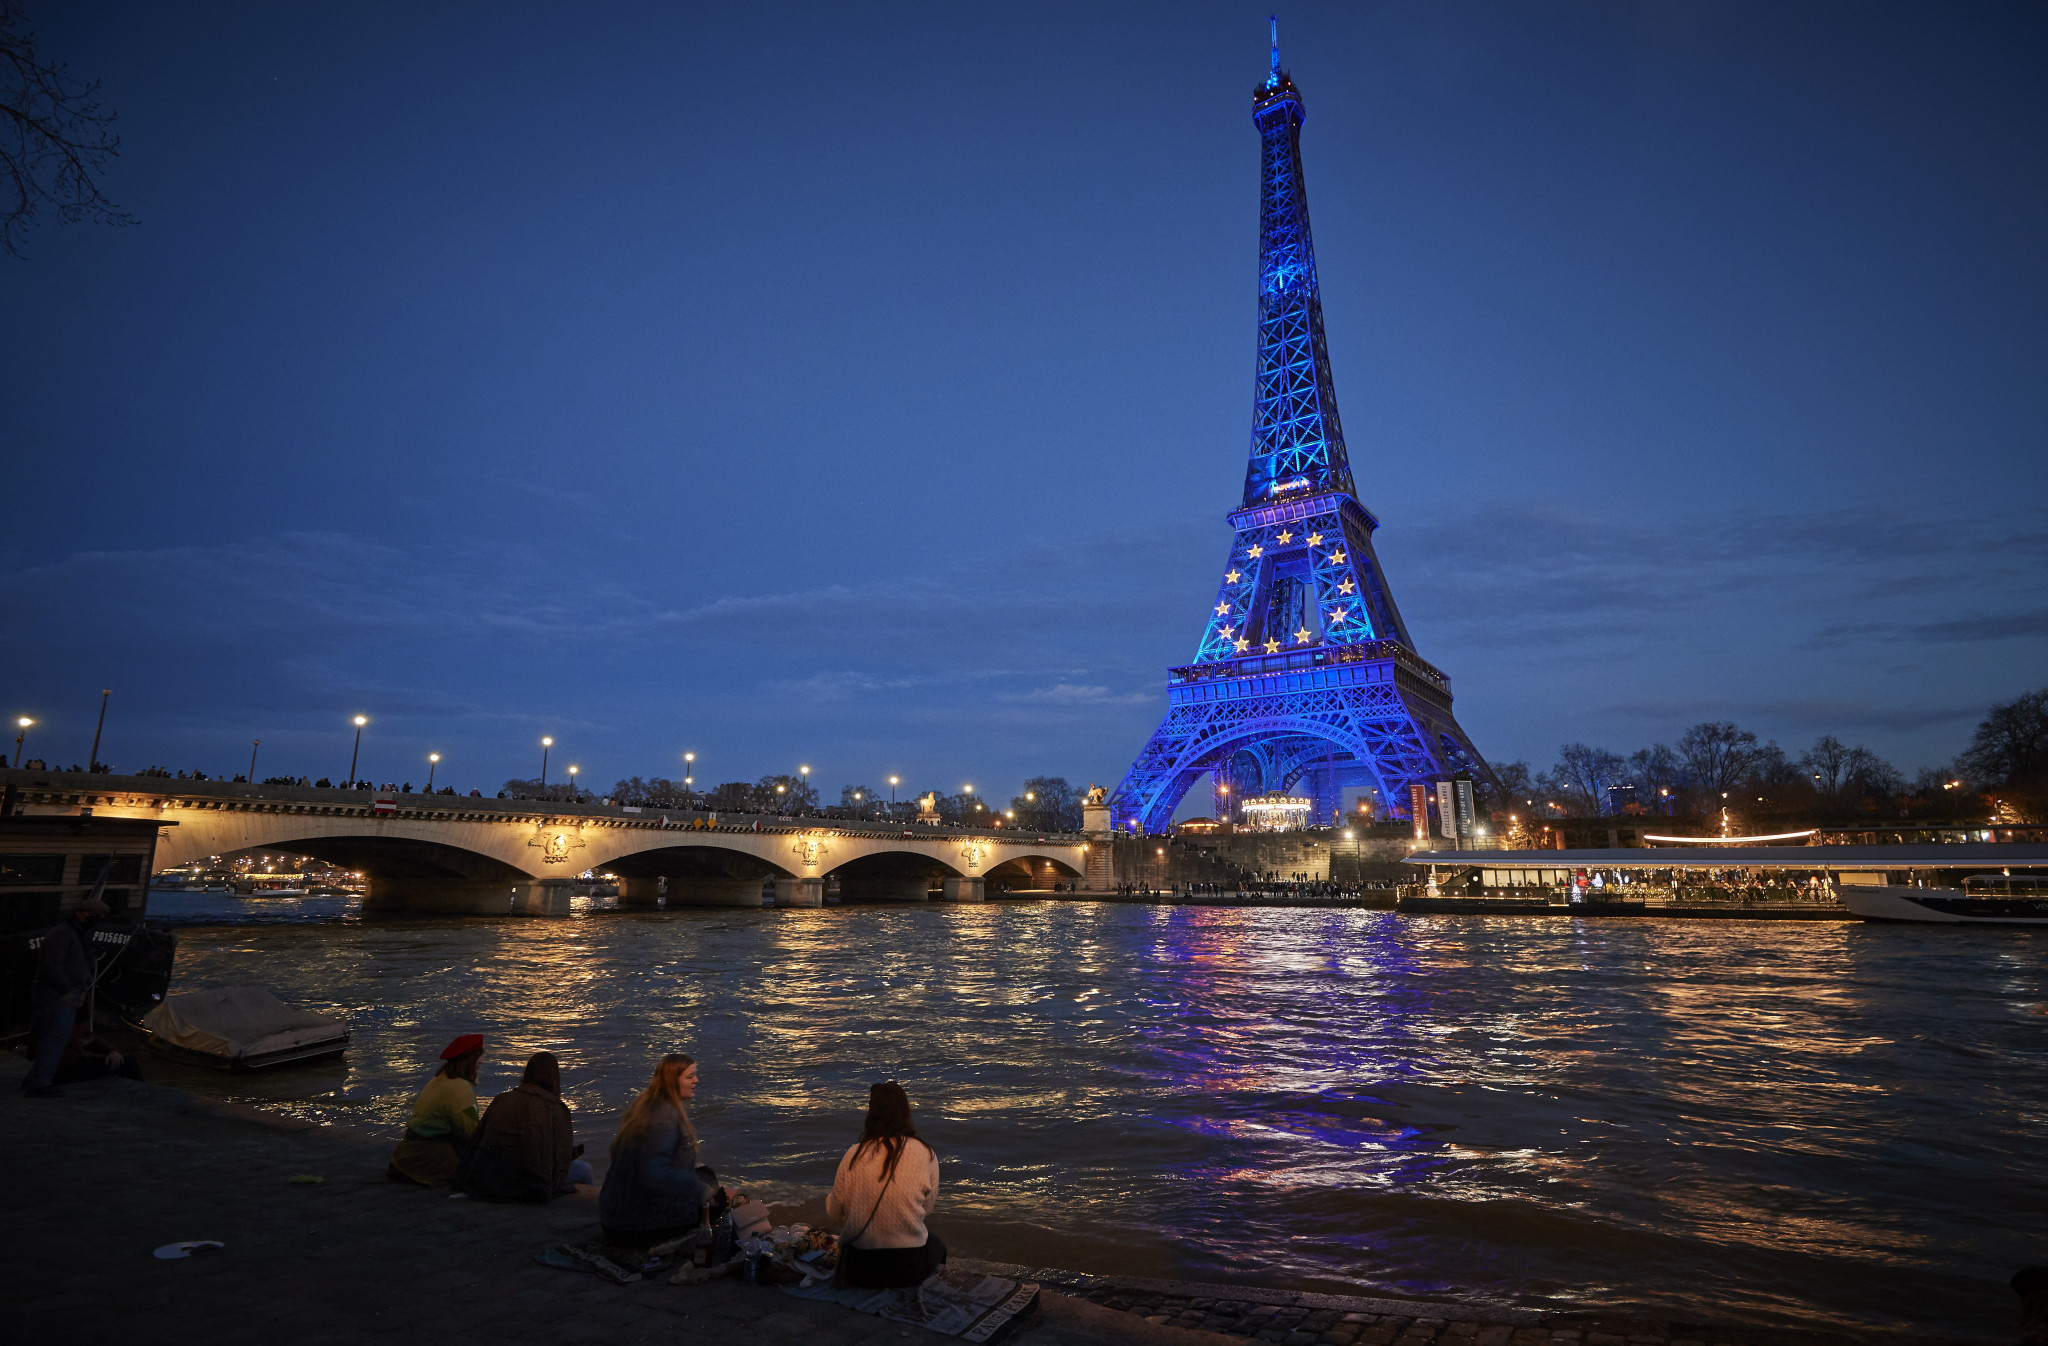 The River Seine is to be used as a major part of the Paris 2024 Opening Ceremony ©Getty Images